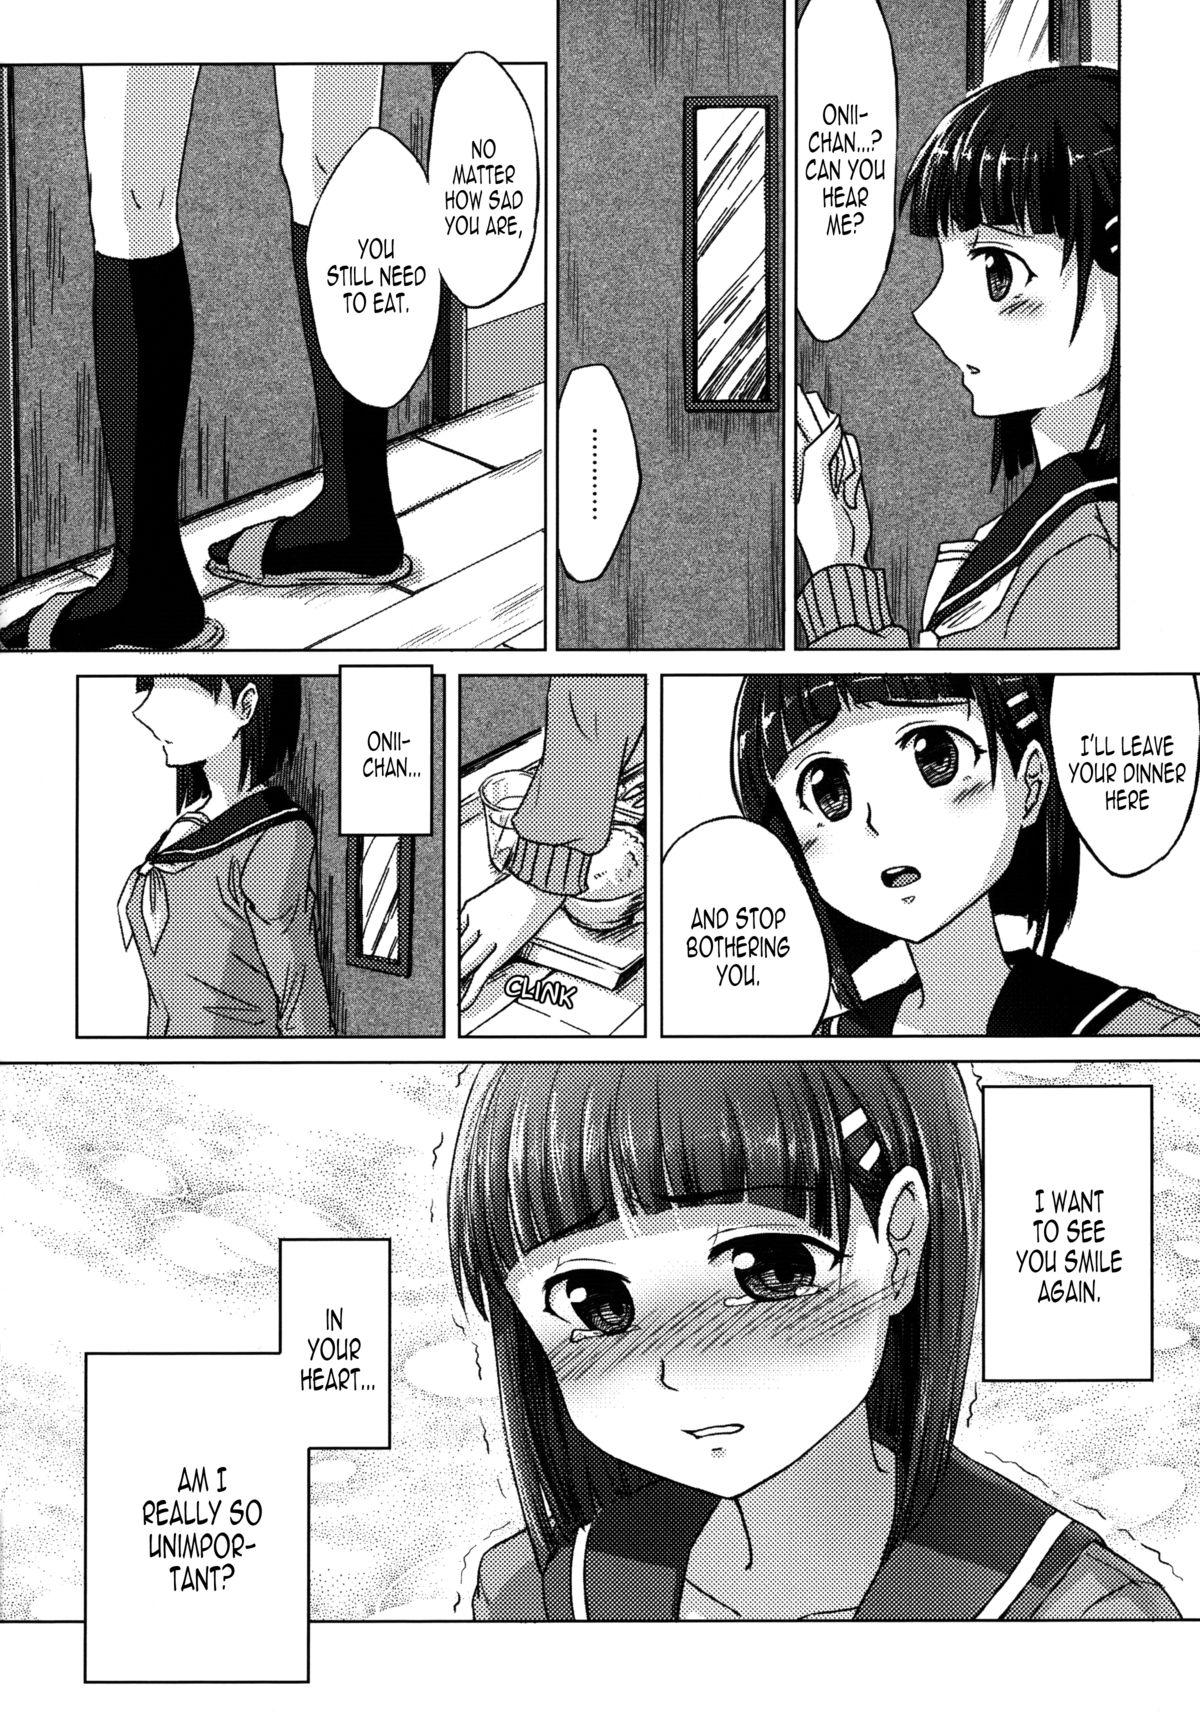 Work Imouto no Mousou Record | Record of My Sister's Delusion - Sword art online Gay Baitbus - Page 6